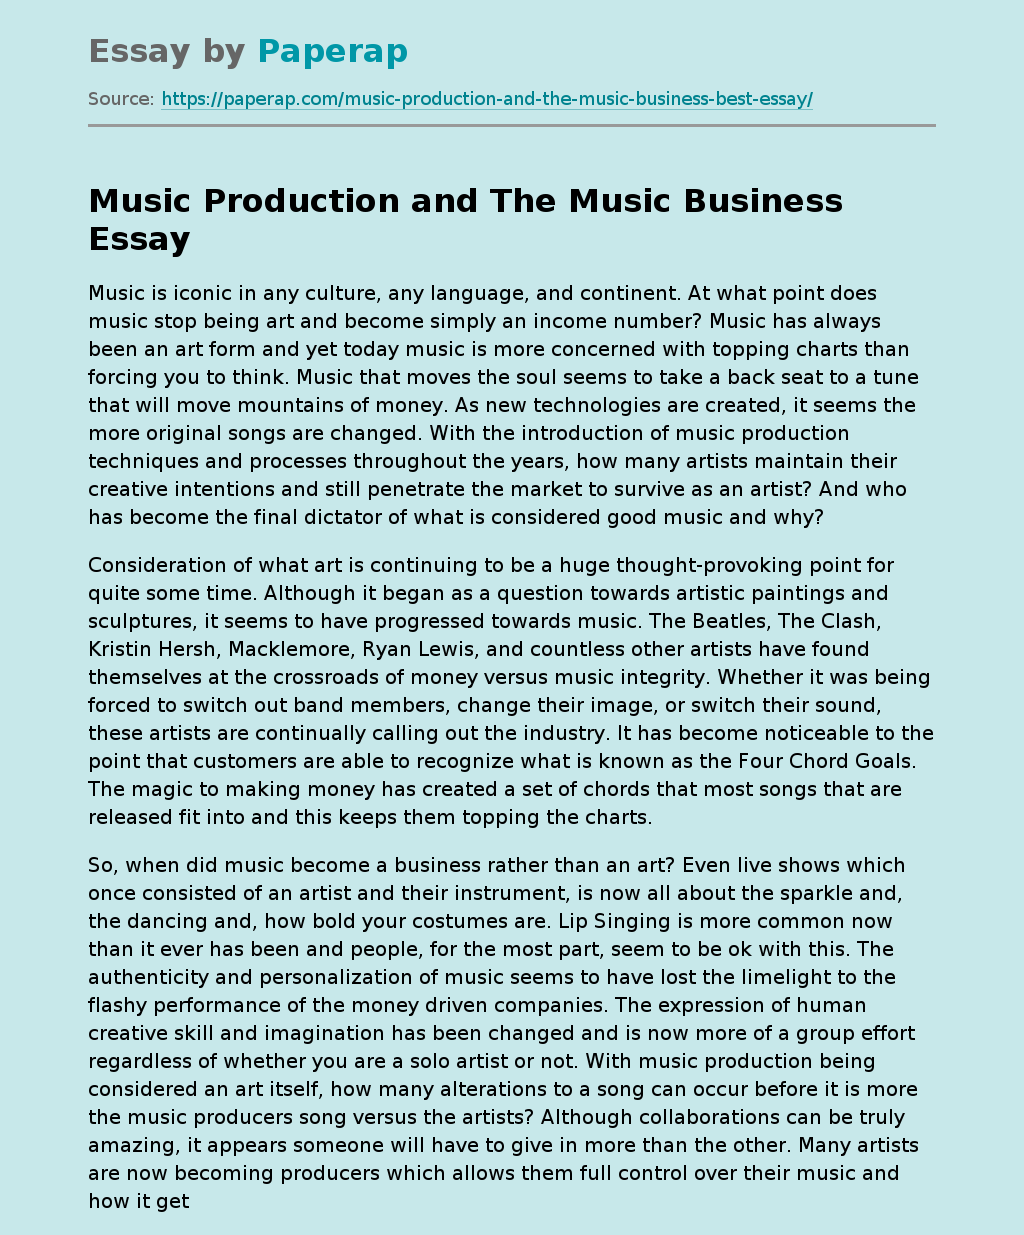 Music Production and The Music Business